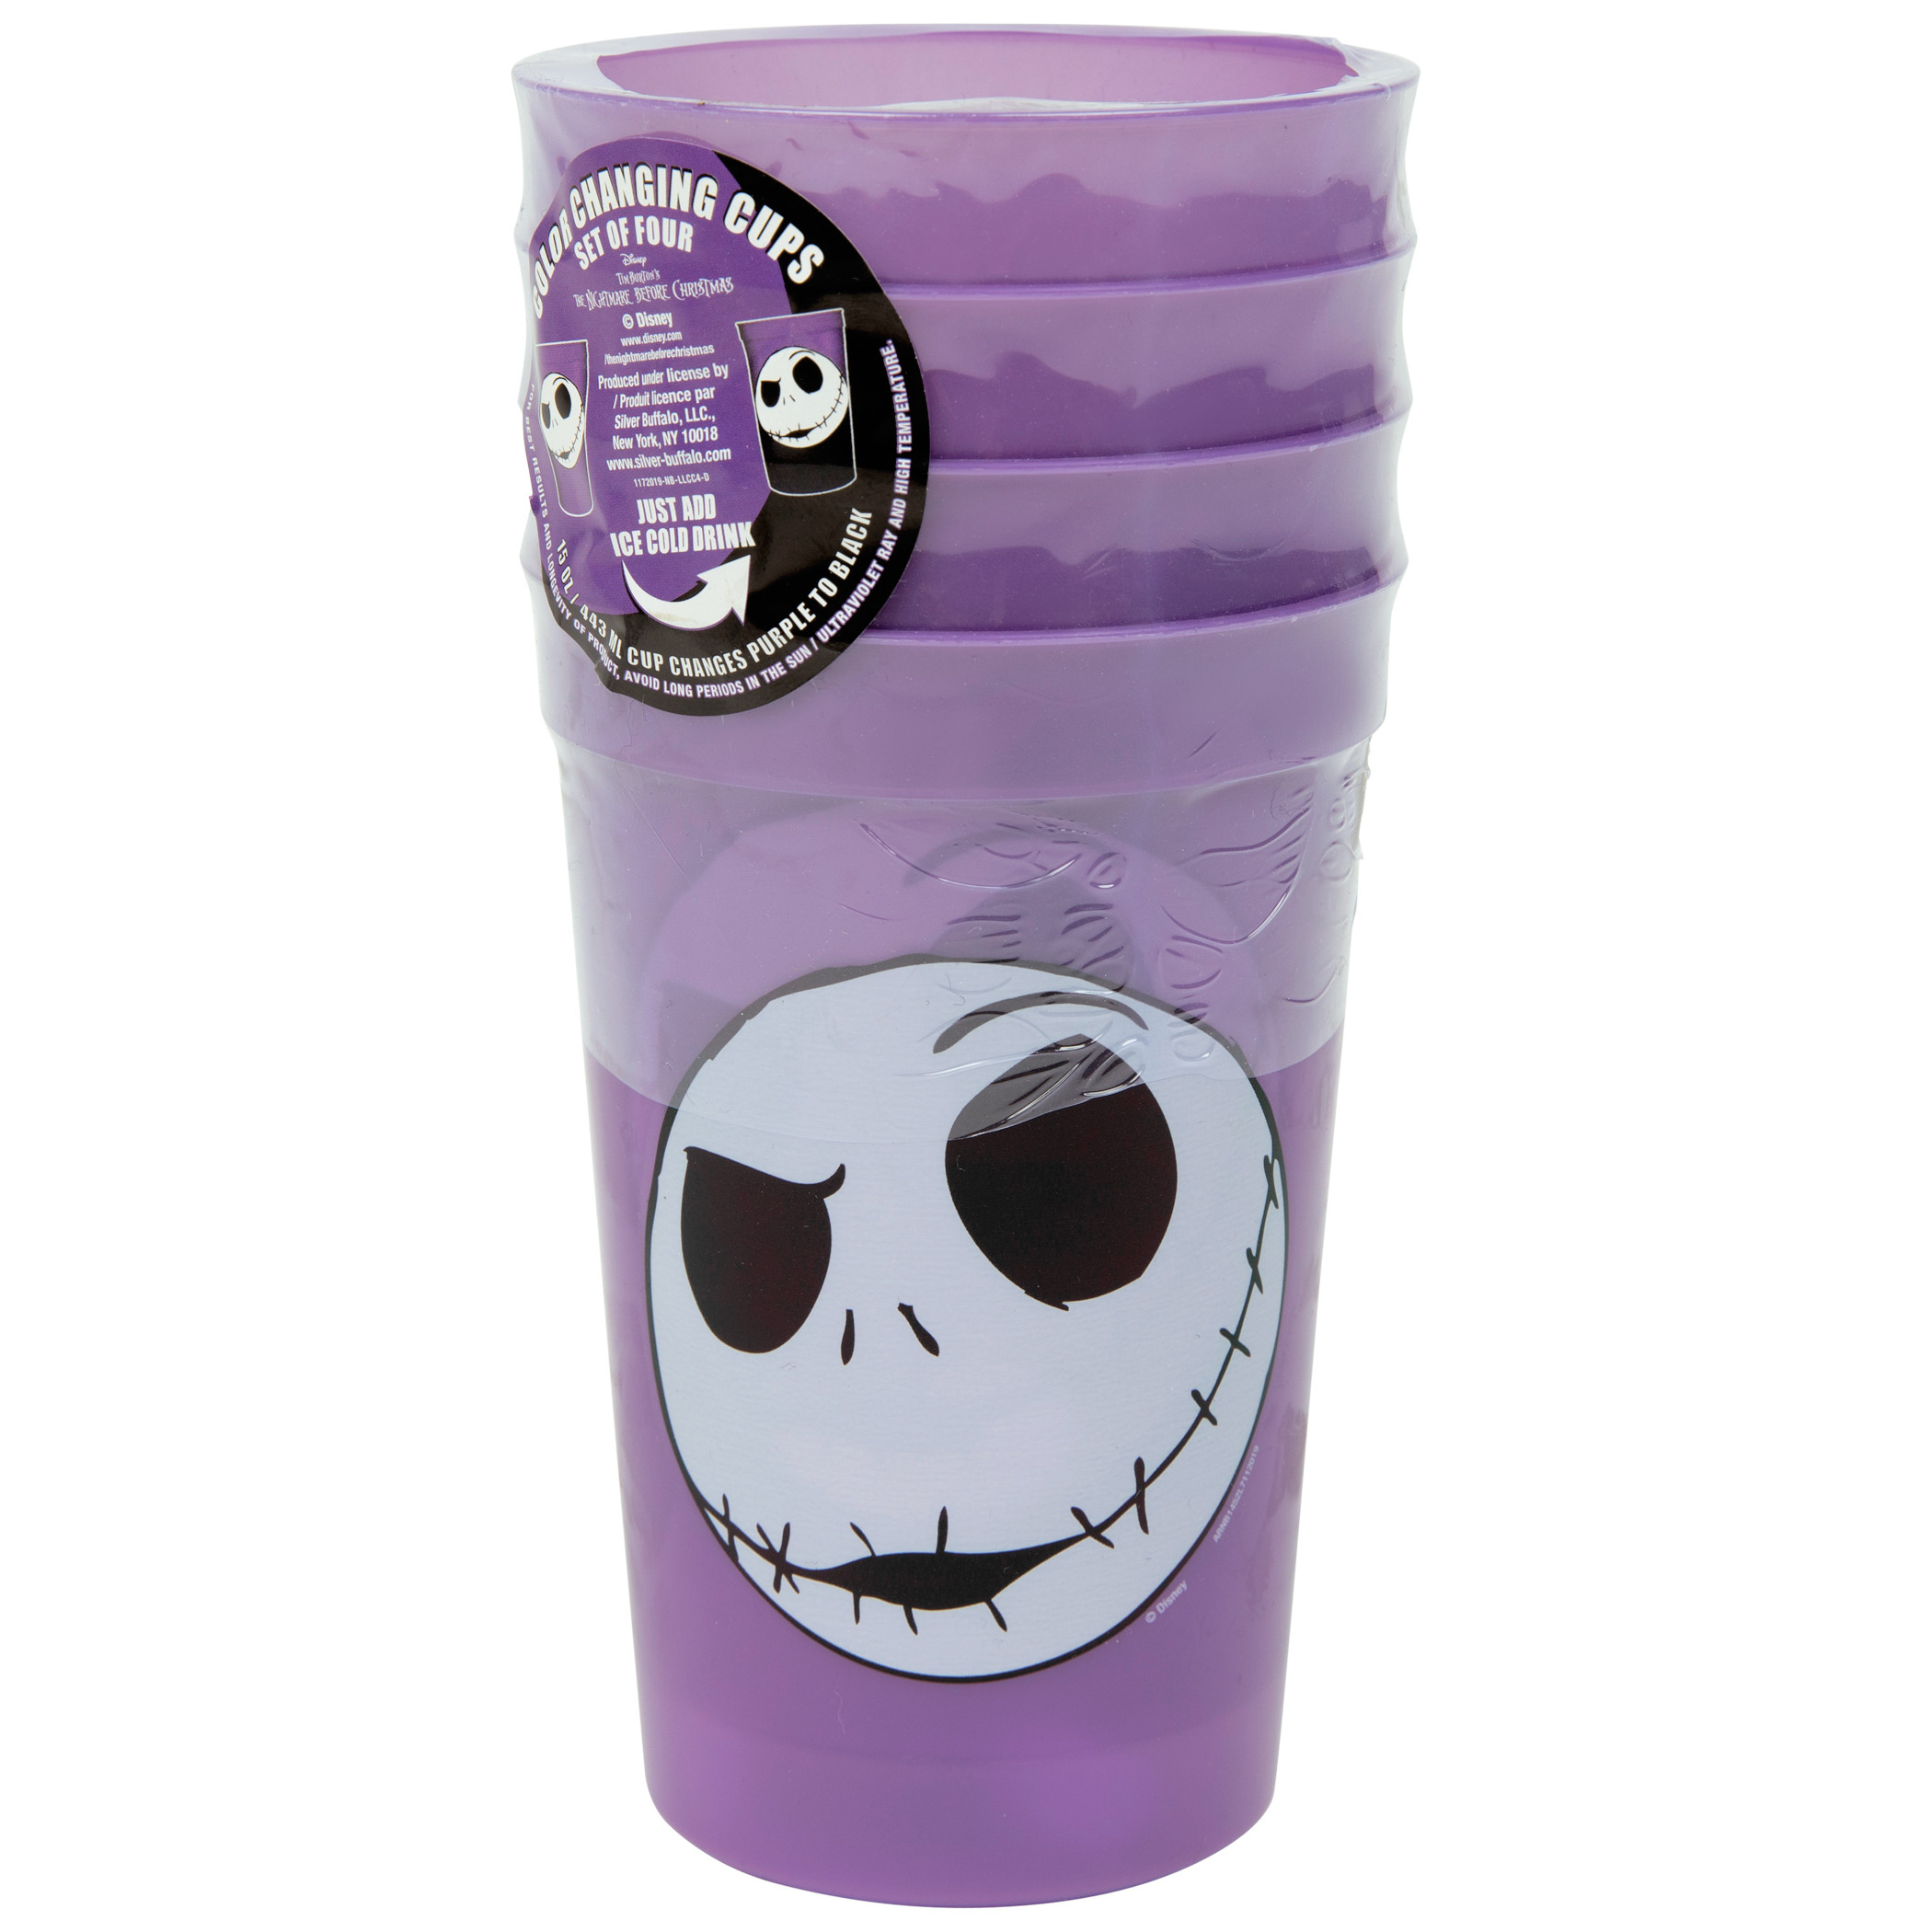 Nightmare Before Christmas Jack Face 4-Pack of 15oz Color Changing Cups